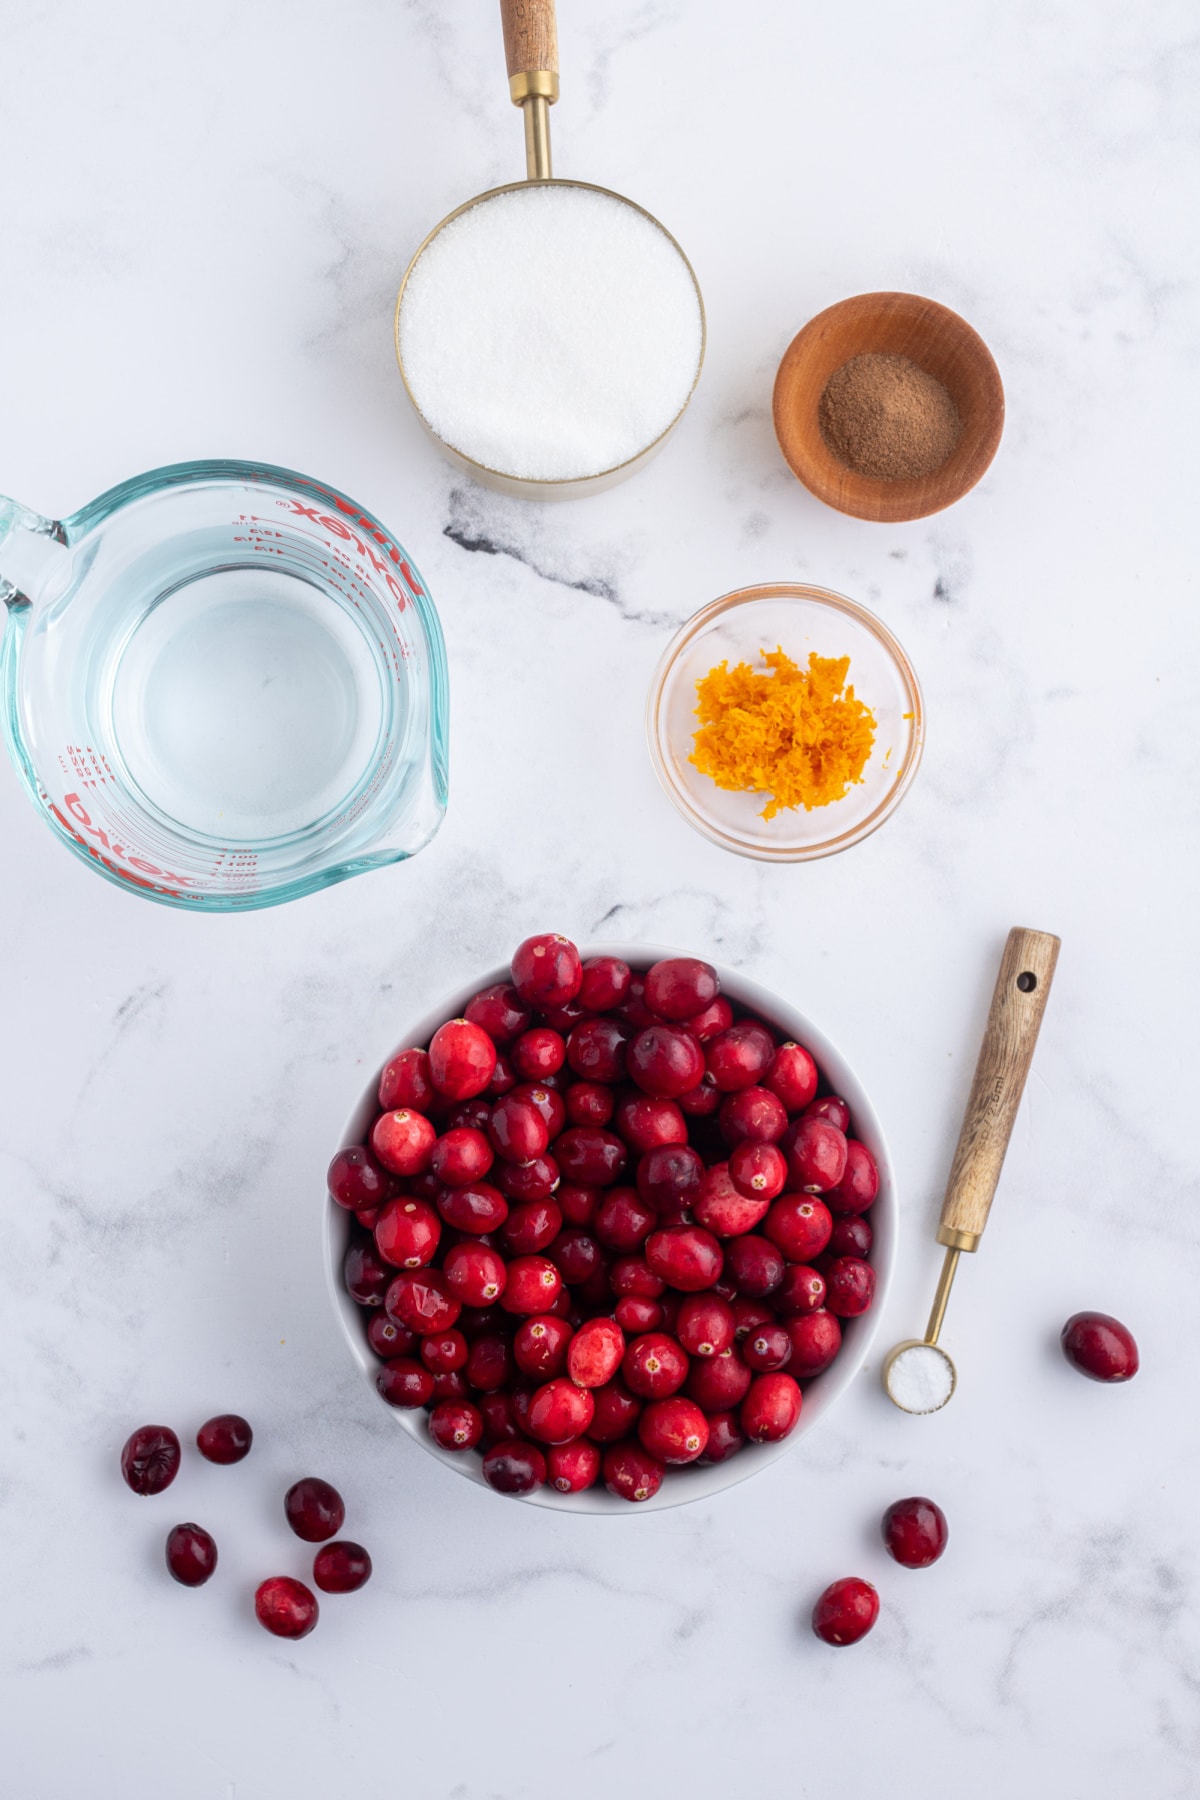 ingredients displayed for making classic cranberry sauce